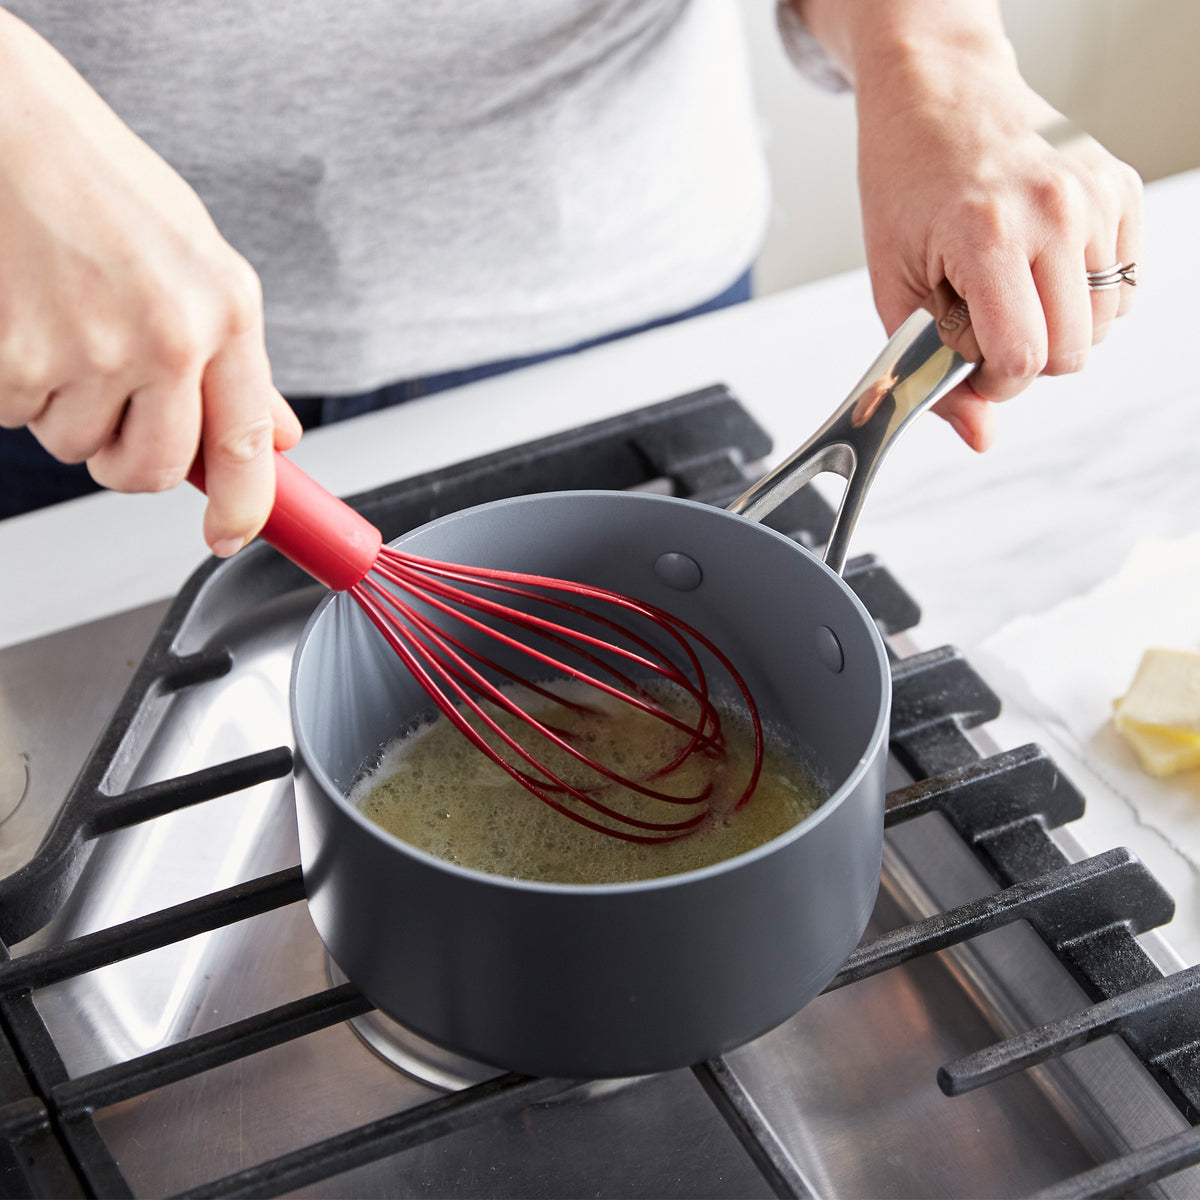 Whisk Commercial Whisks Stainless Steel & Silicone Non-Stick